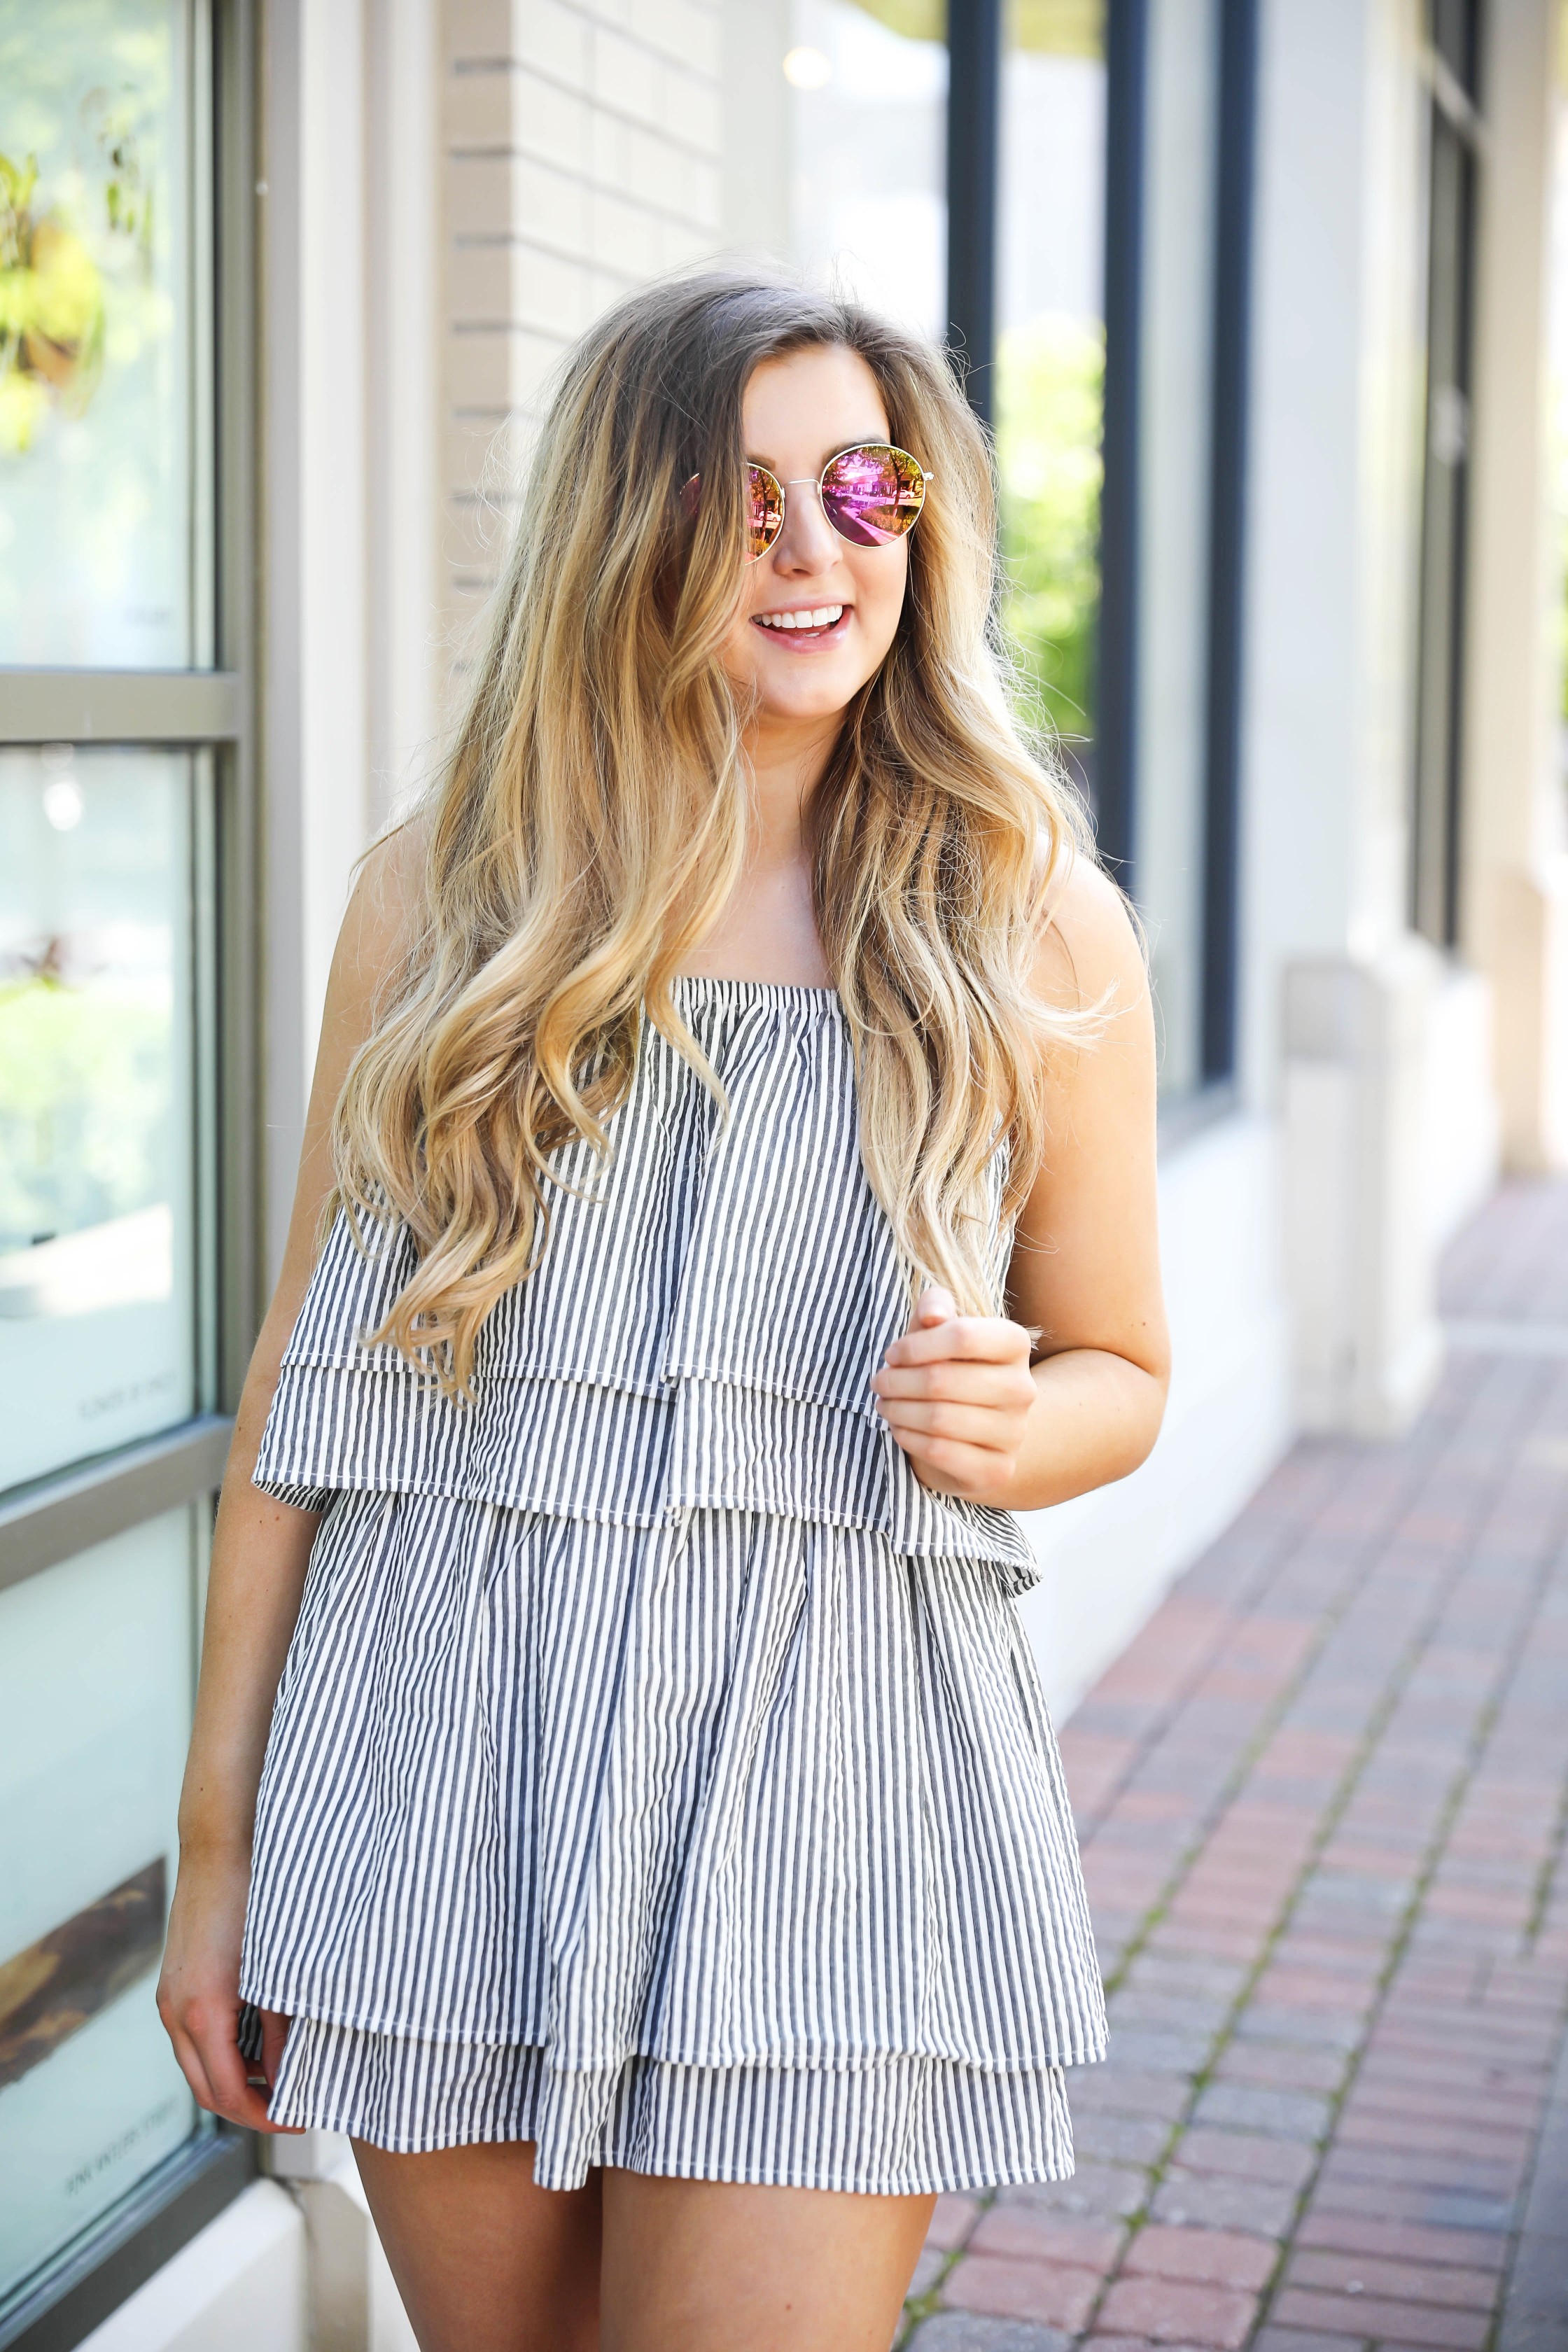 Striped ruffle dress with circle sunglasses and brown leather sandals! By Lauren Lindmark on dailydoseofcharm.com fashion blog daily dose of charm